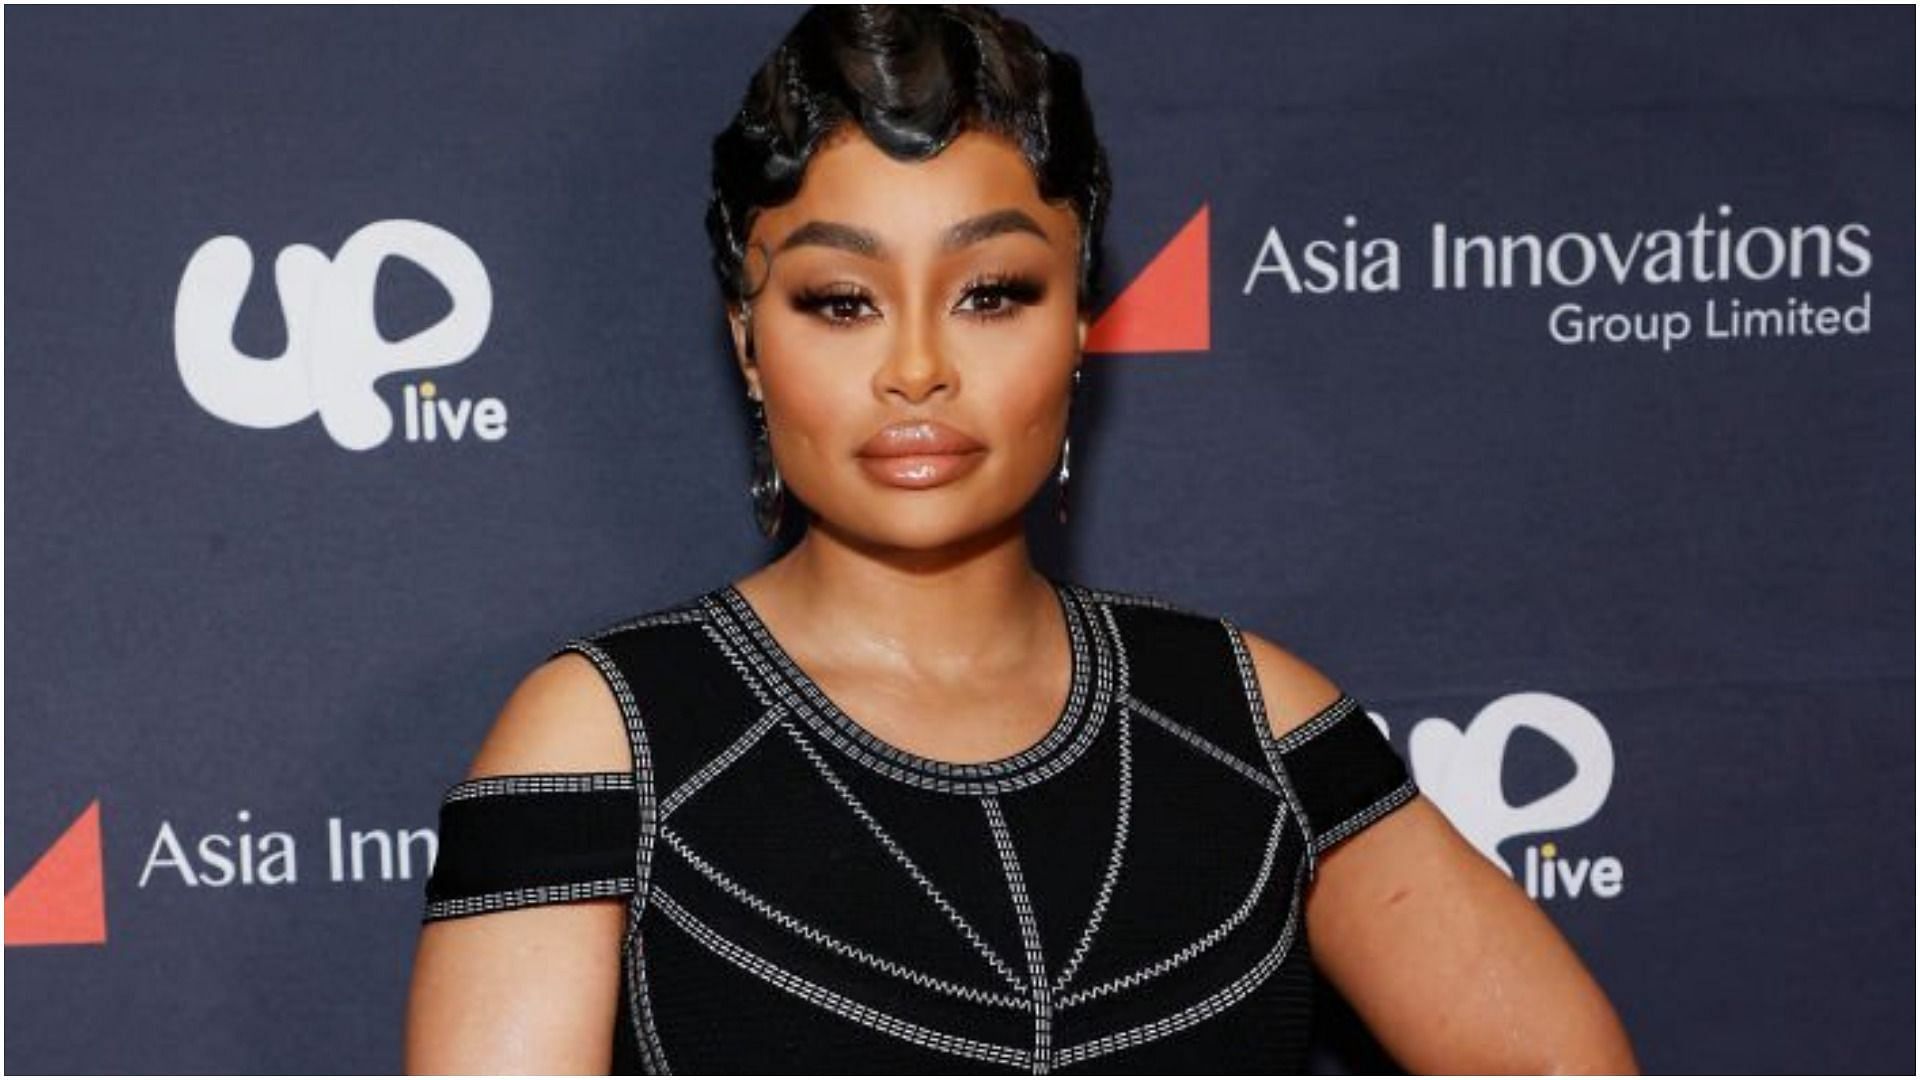 Blac Chyna sold three of her cars for not receiving support from her exes (Image via Michael Tran/Getty Images)